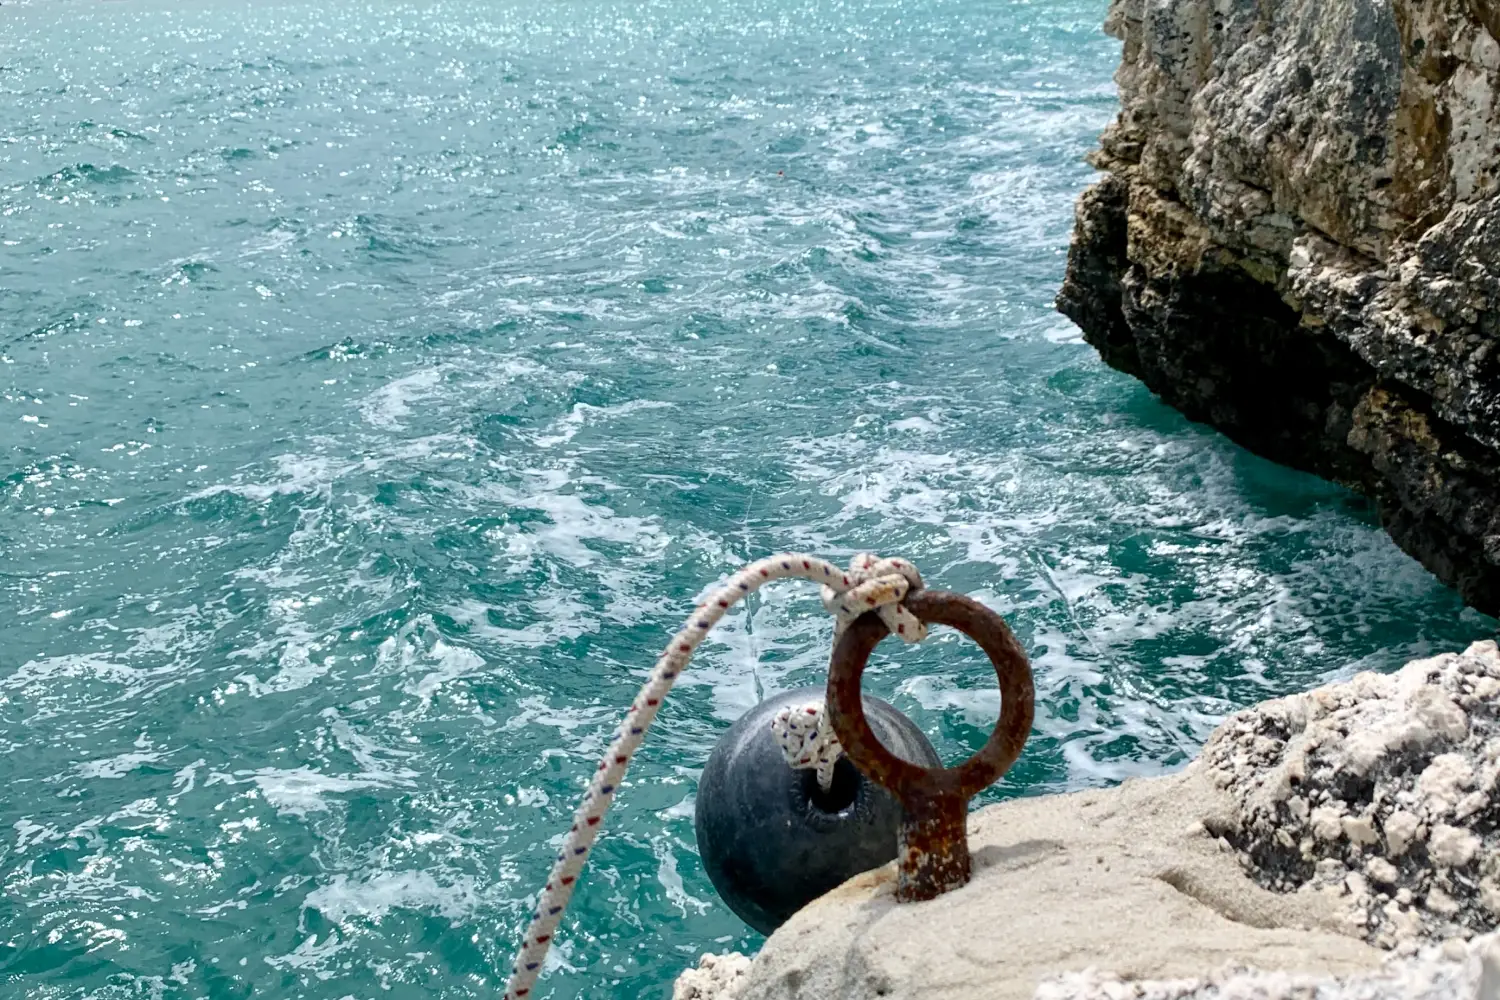 Ferry to Vieste - Rope on hook at a rocky beach.